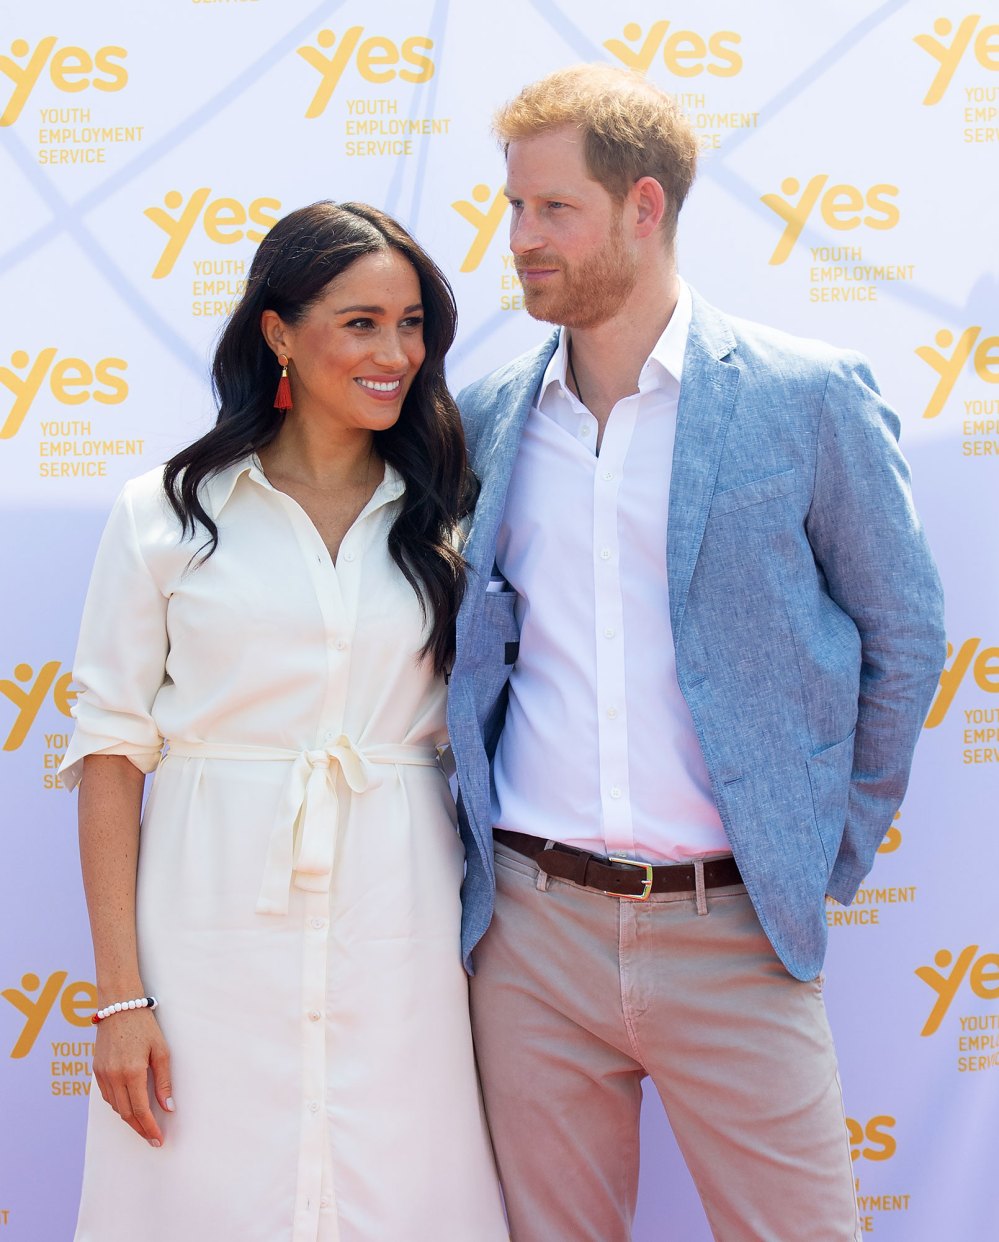 Meghan Markle to Join Prince Harry in Nigeria After His UK Visit